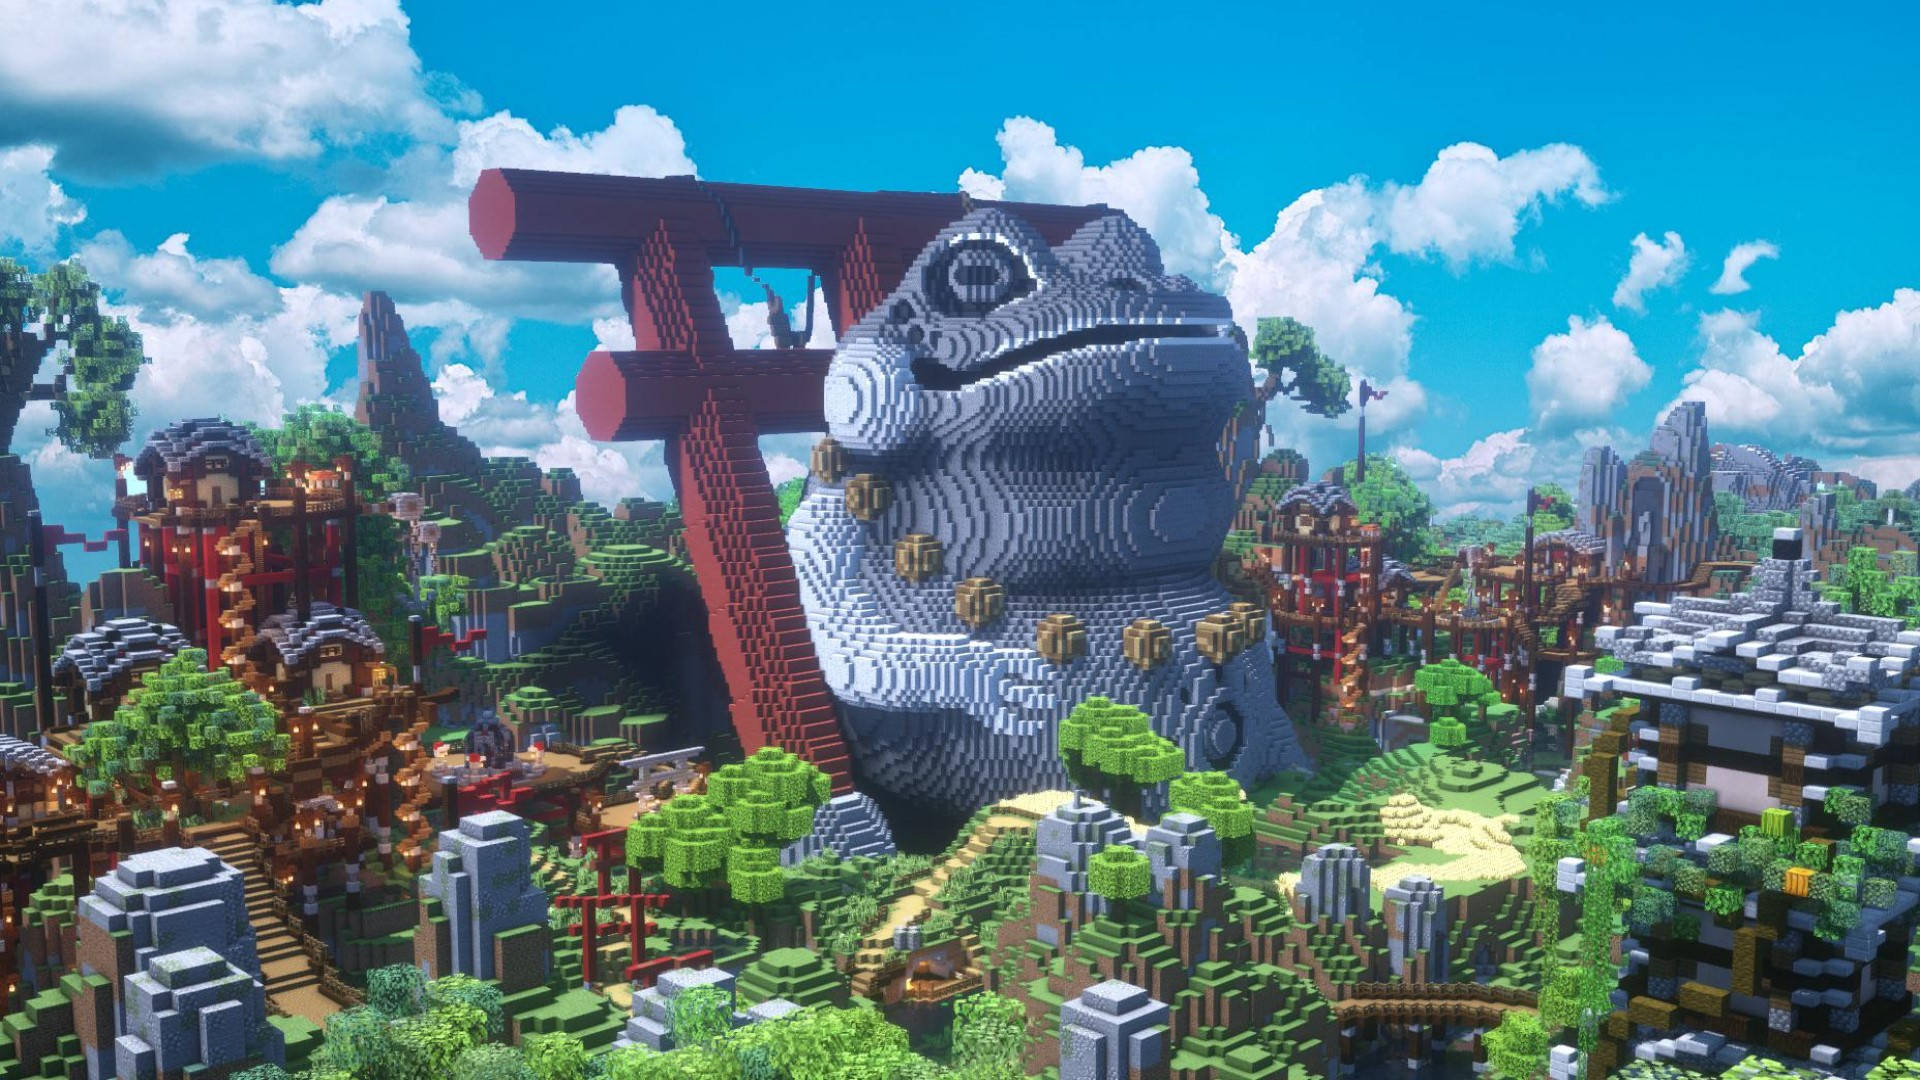 Beautiful Minecraft Giant Frog Statue